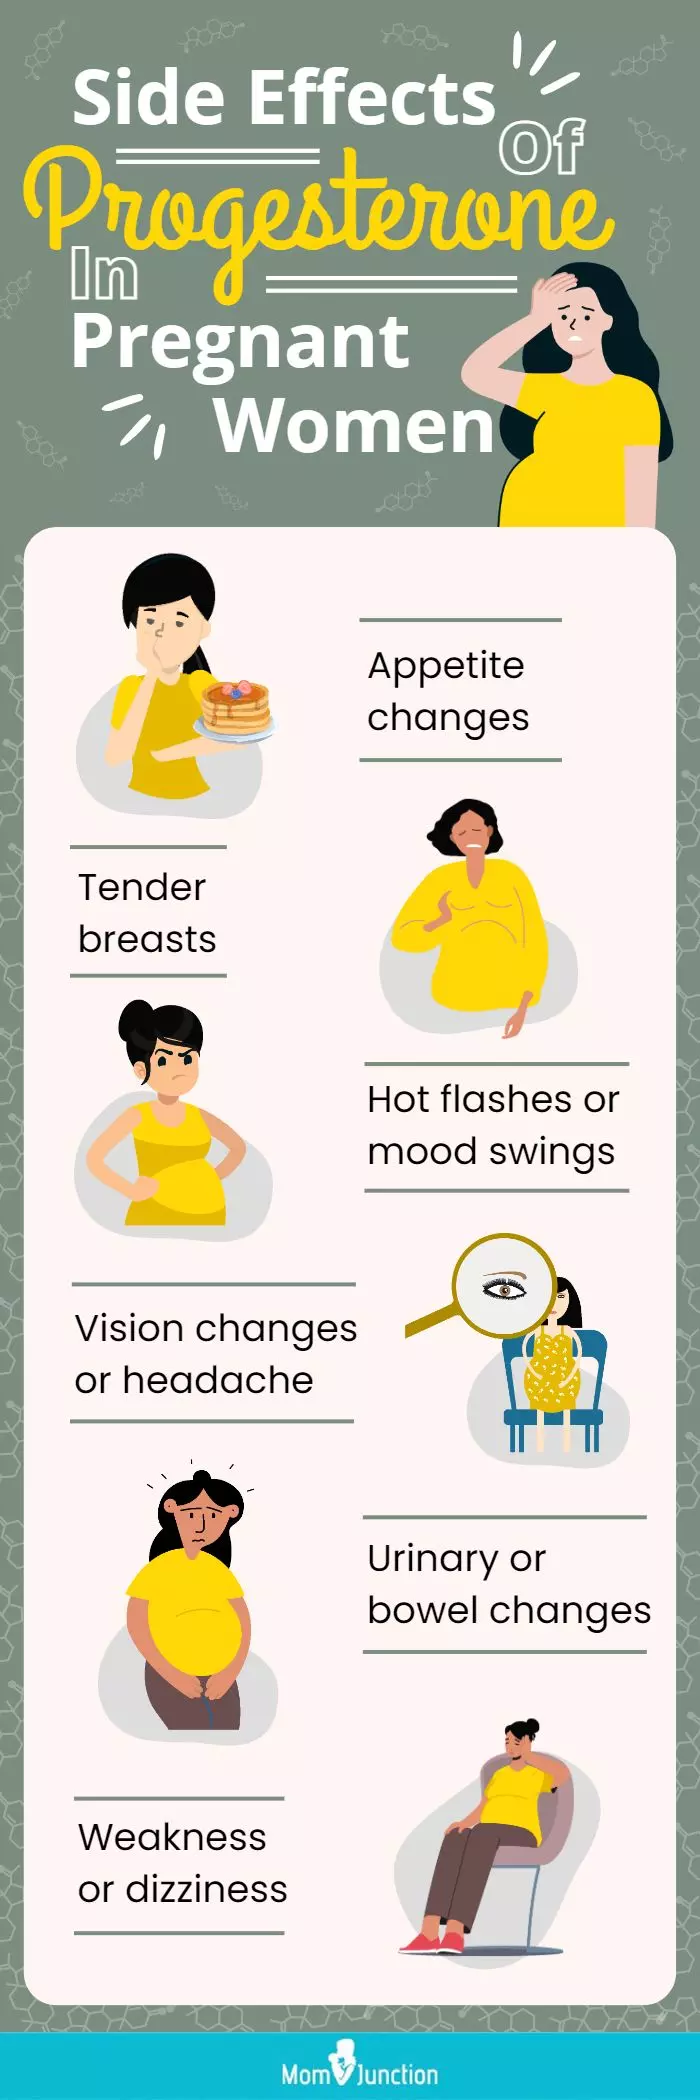 side effects of progesterone in pregnant women (infographic)